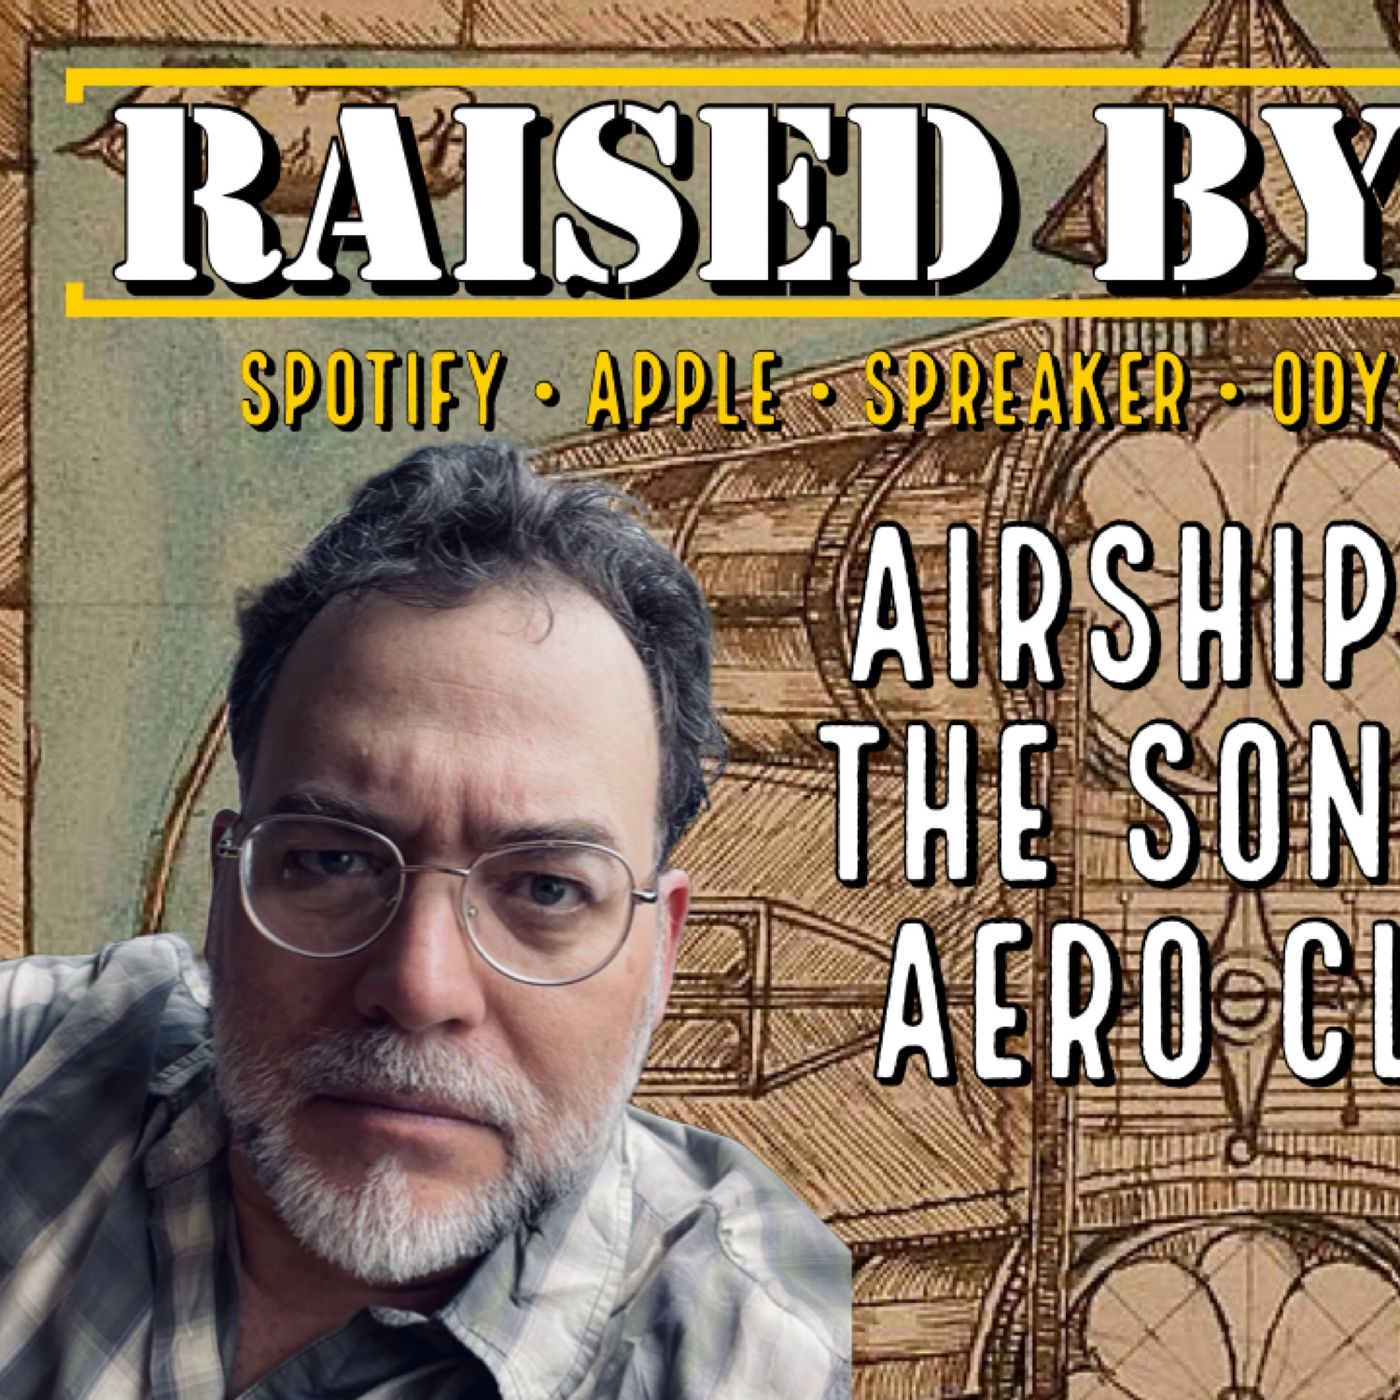 Airships Mysteries & The Sonora Aero Club with Walter Bosley (2/2)